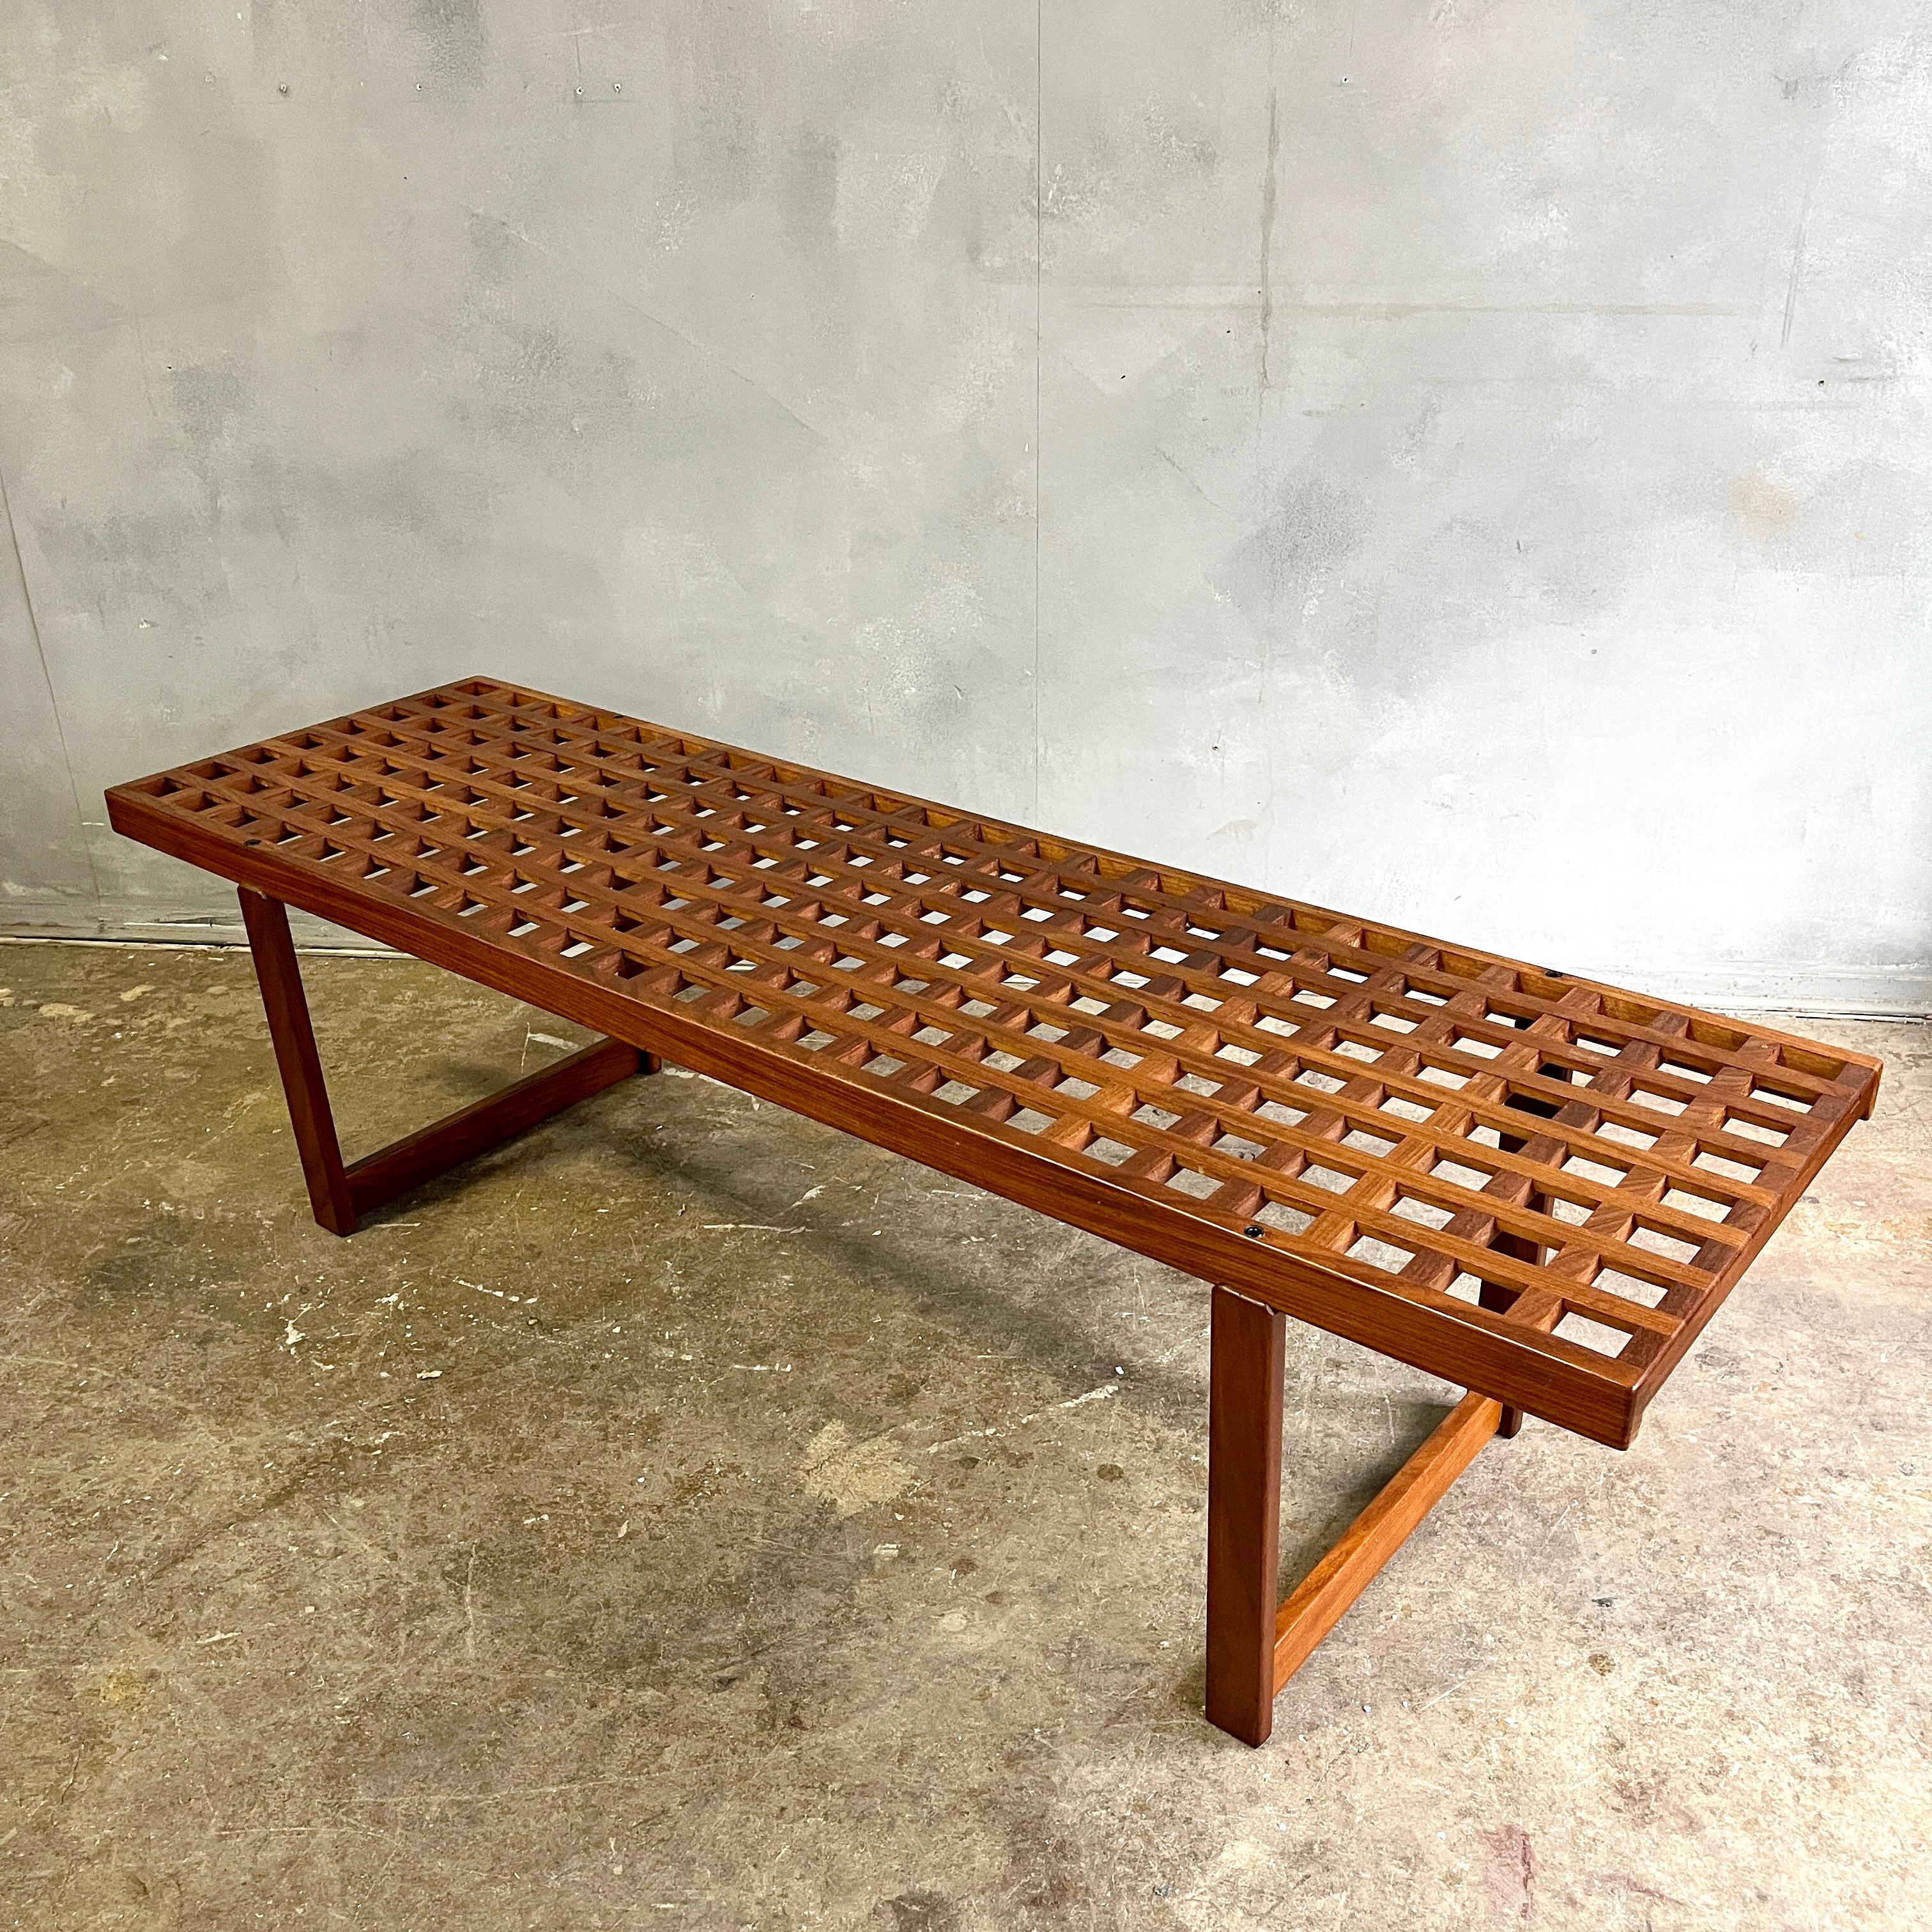 Beautiful slat lattice work bench or coffee table By Peter Loving Nielsen. Wonderful proportions and in excellent vintage condition with a warm teak patina.